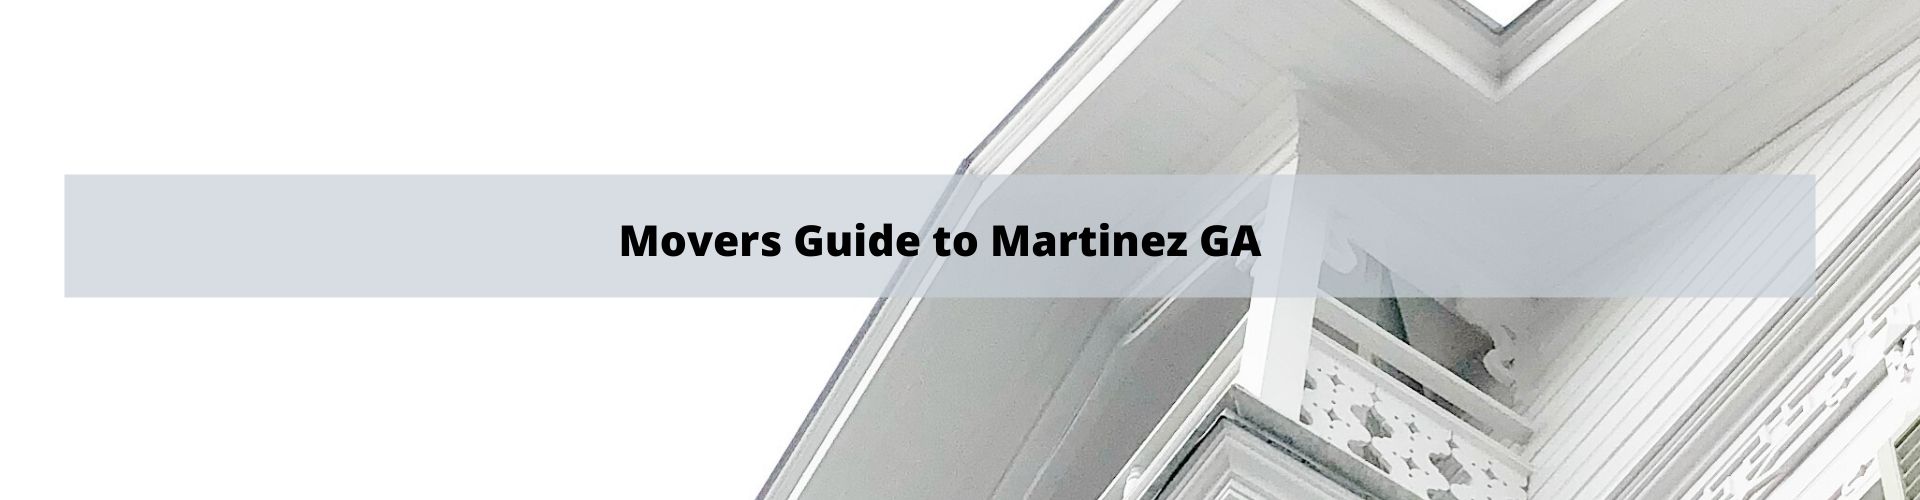 Movers Guide to Martinez GA Columbia County